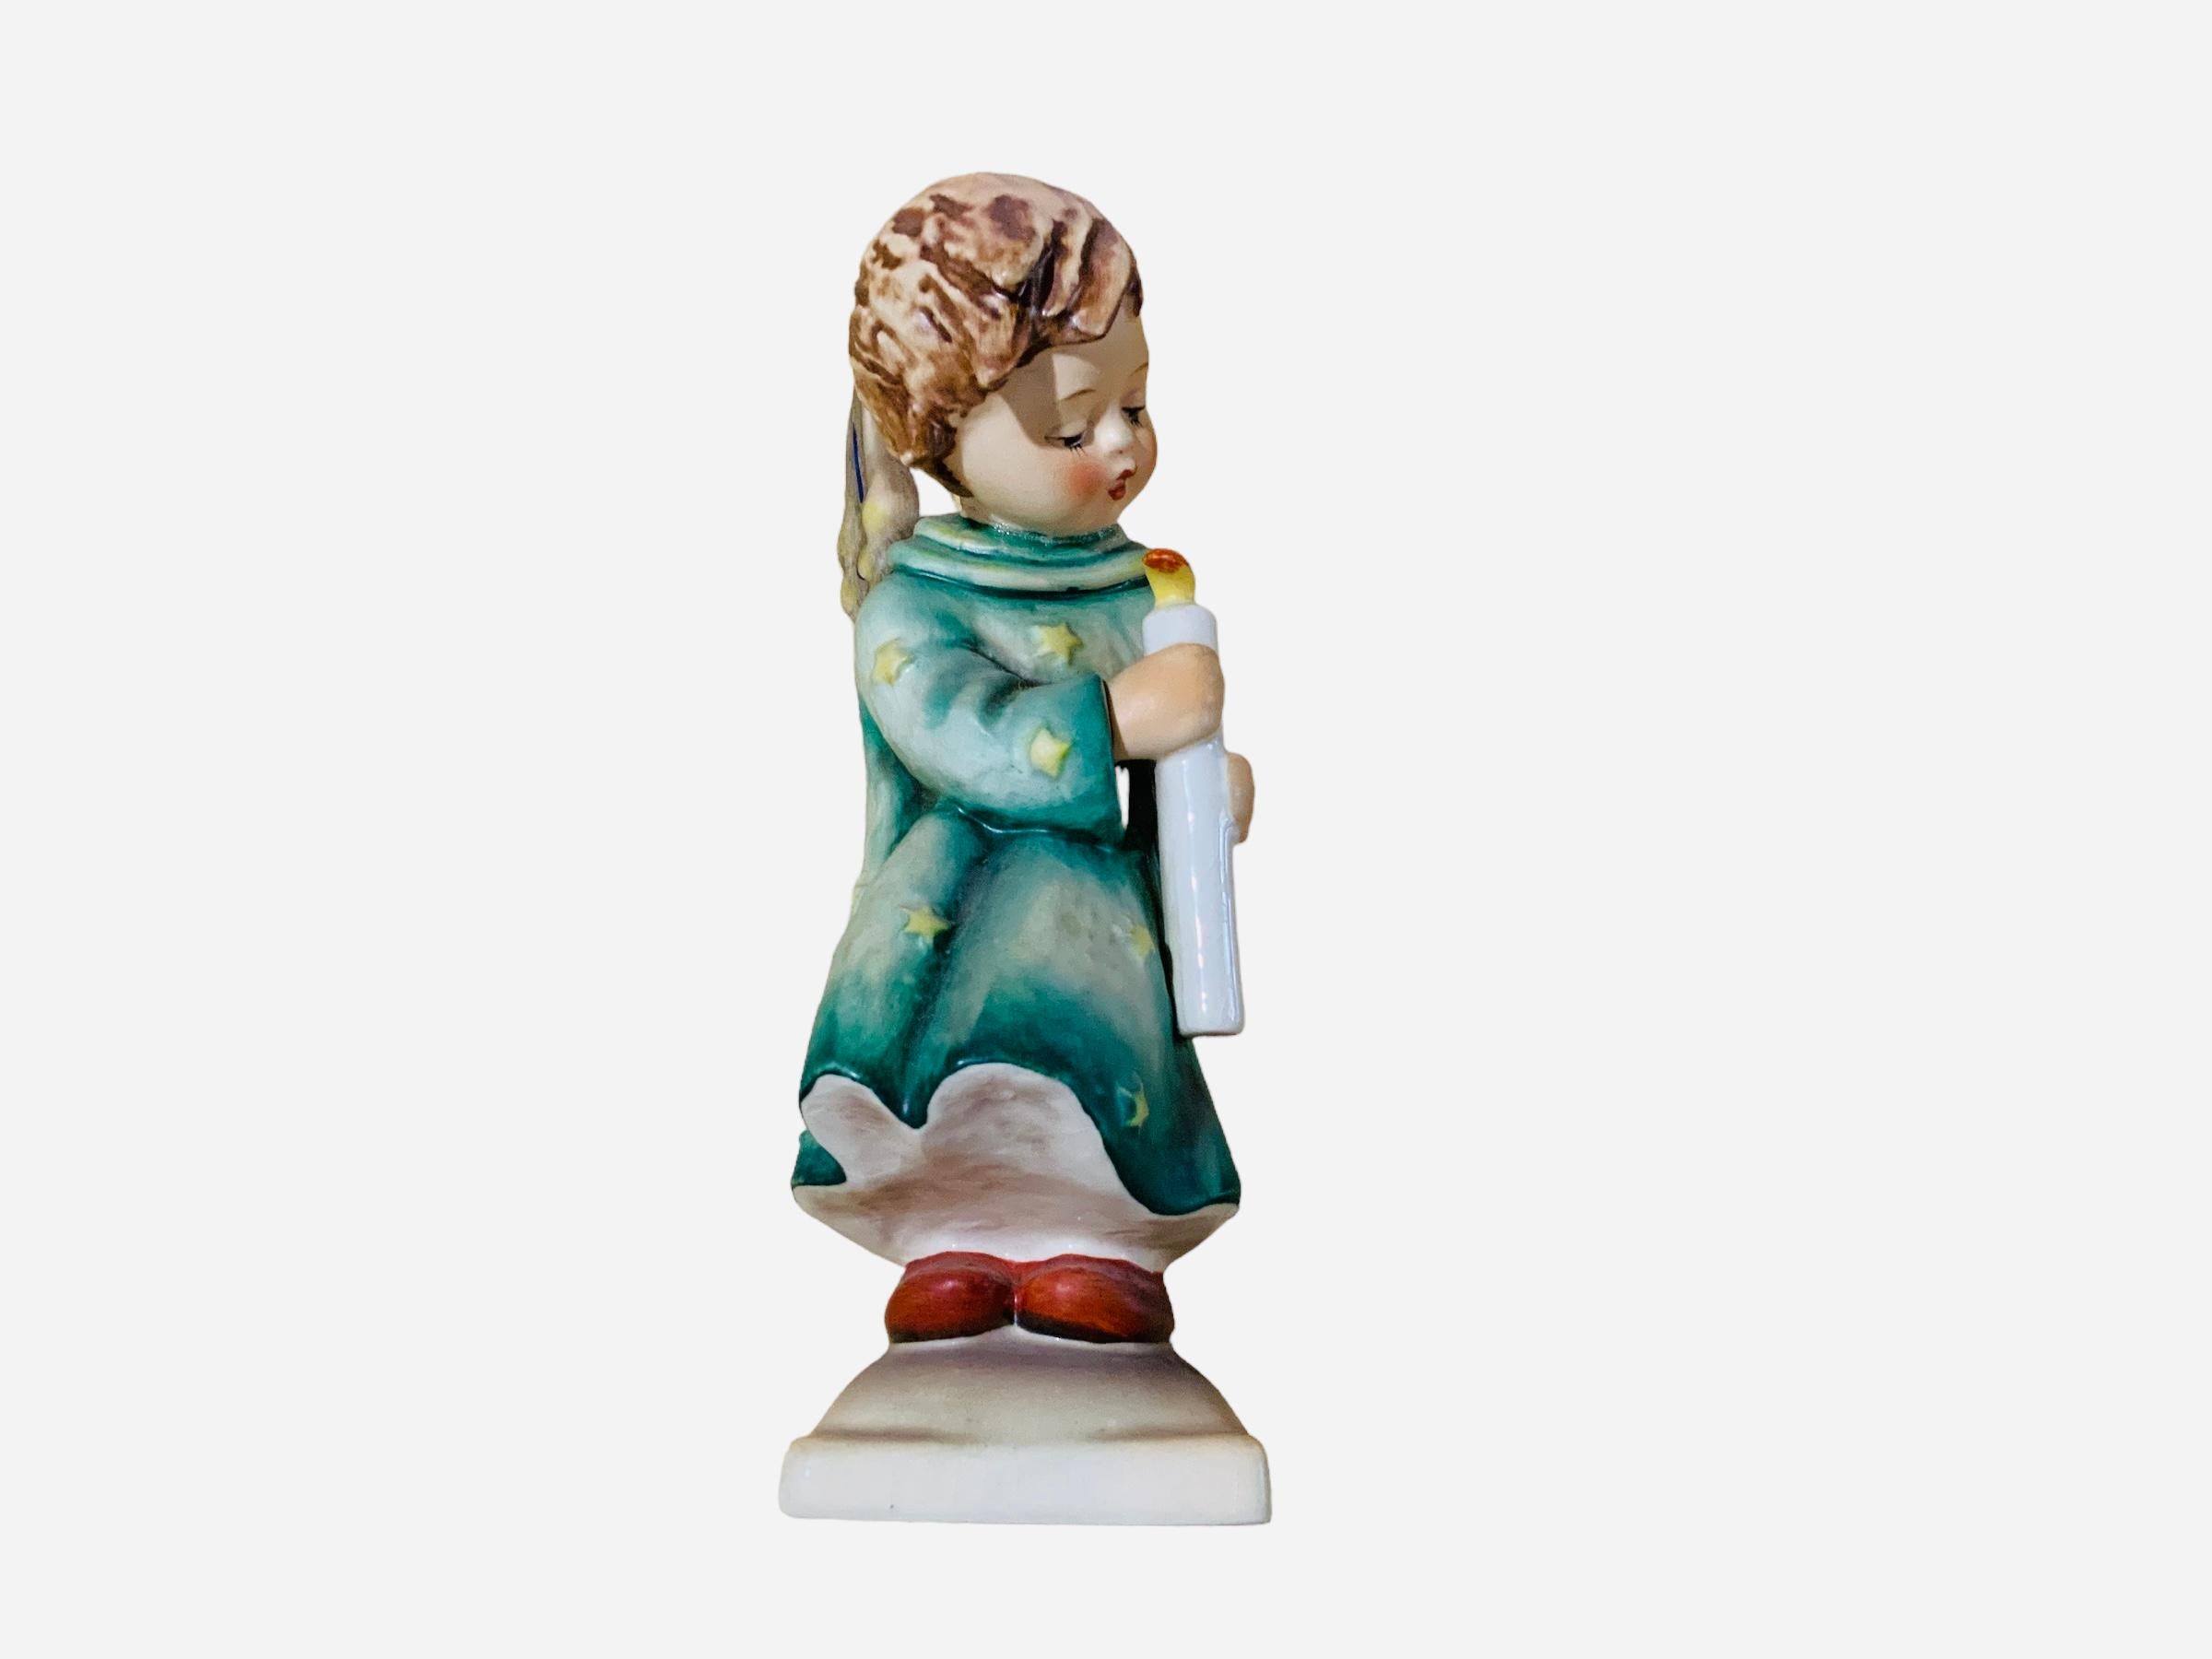 This is a Hummel porcelain figurine of an angel. It’s named “Heavenly Angel”. Its mark is TMK5 (1970’s). The inscription M.I. Hummel is in the back of the figurine. The trademark of Goebel company is below the base with the #27 inscribed.